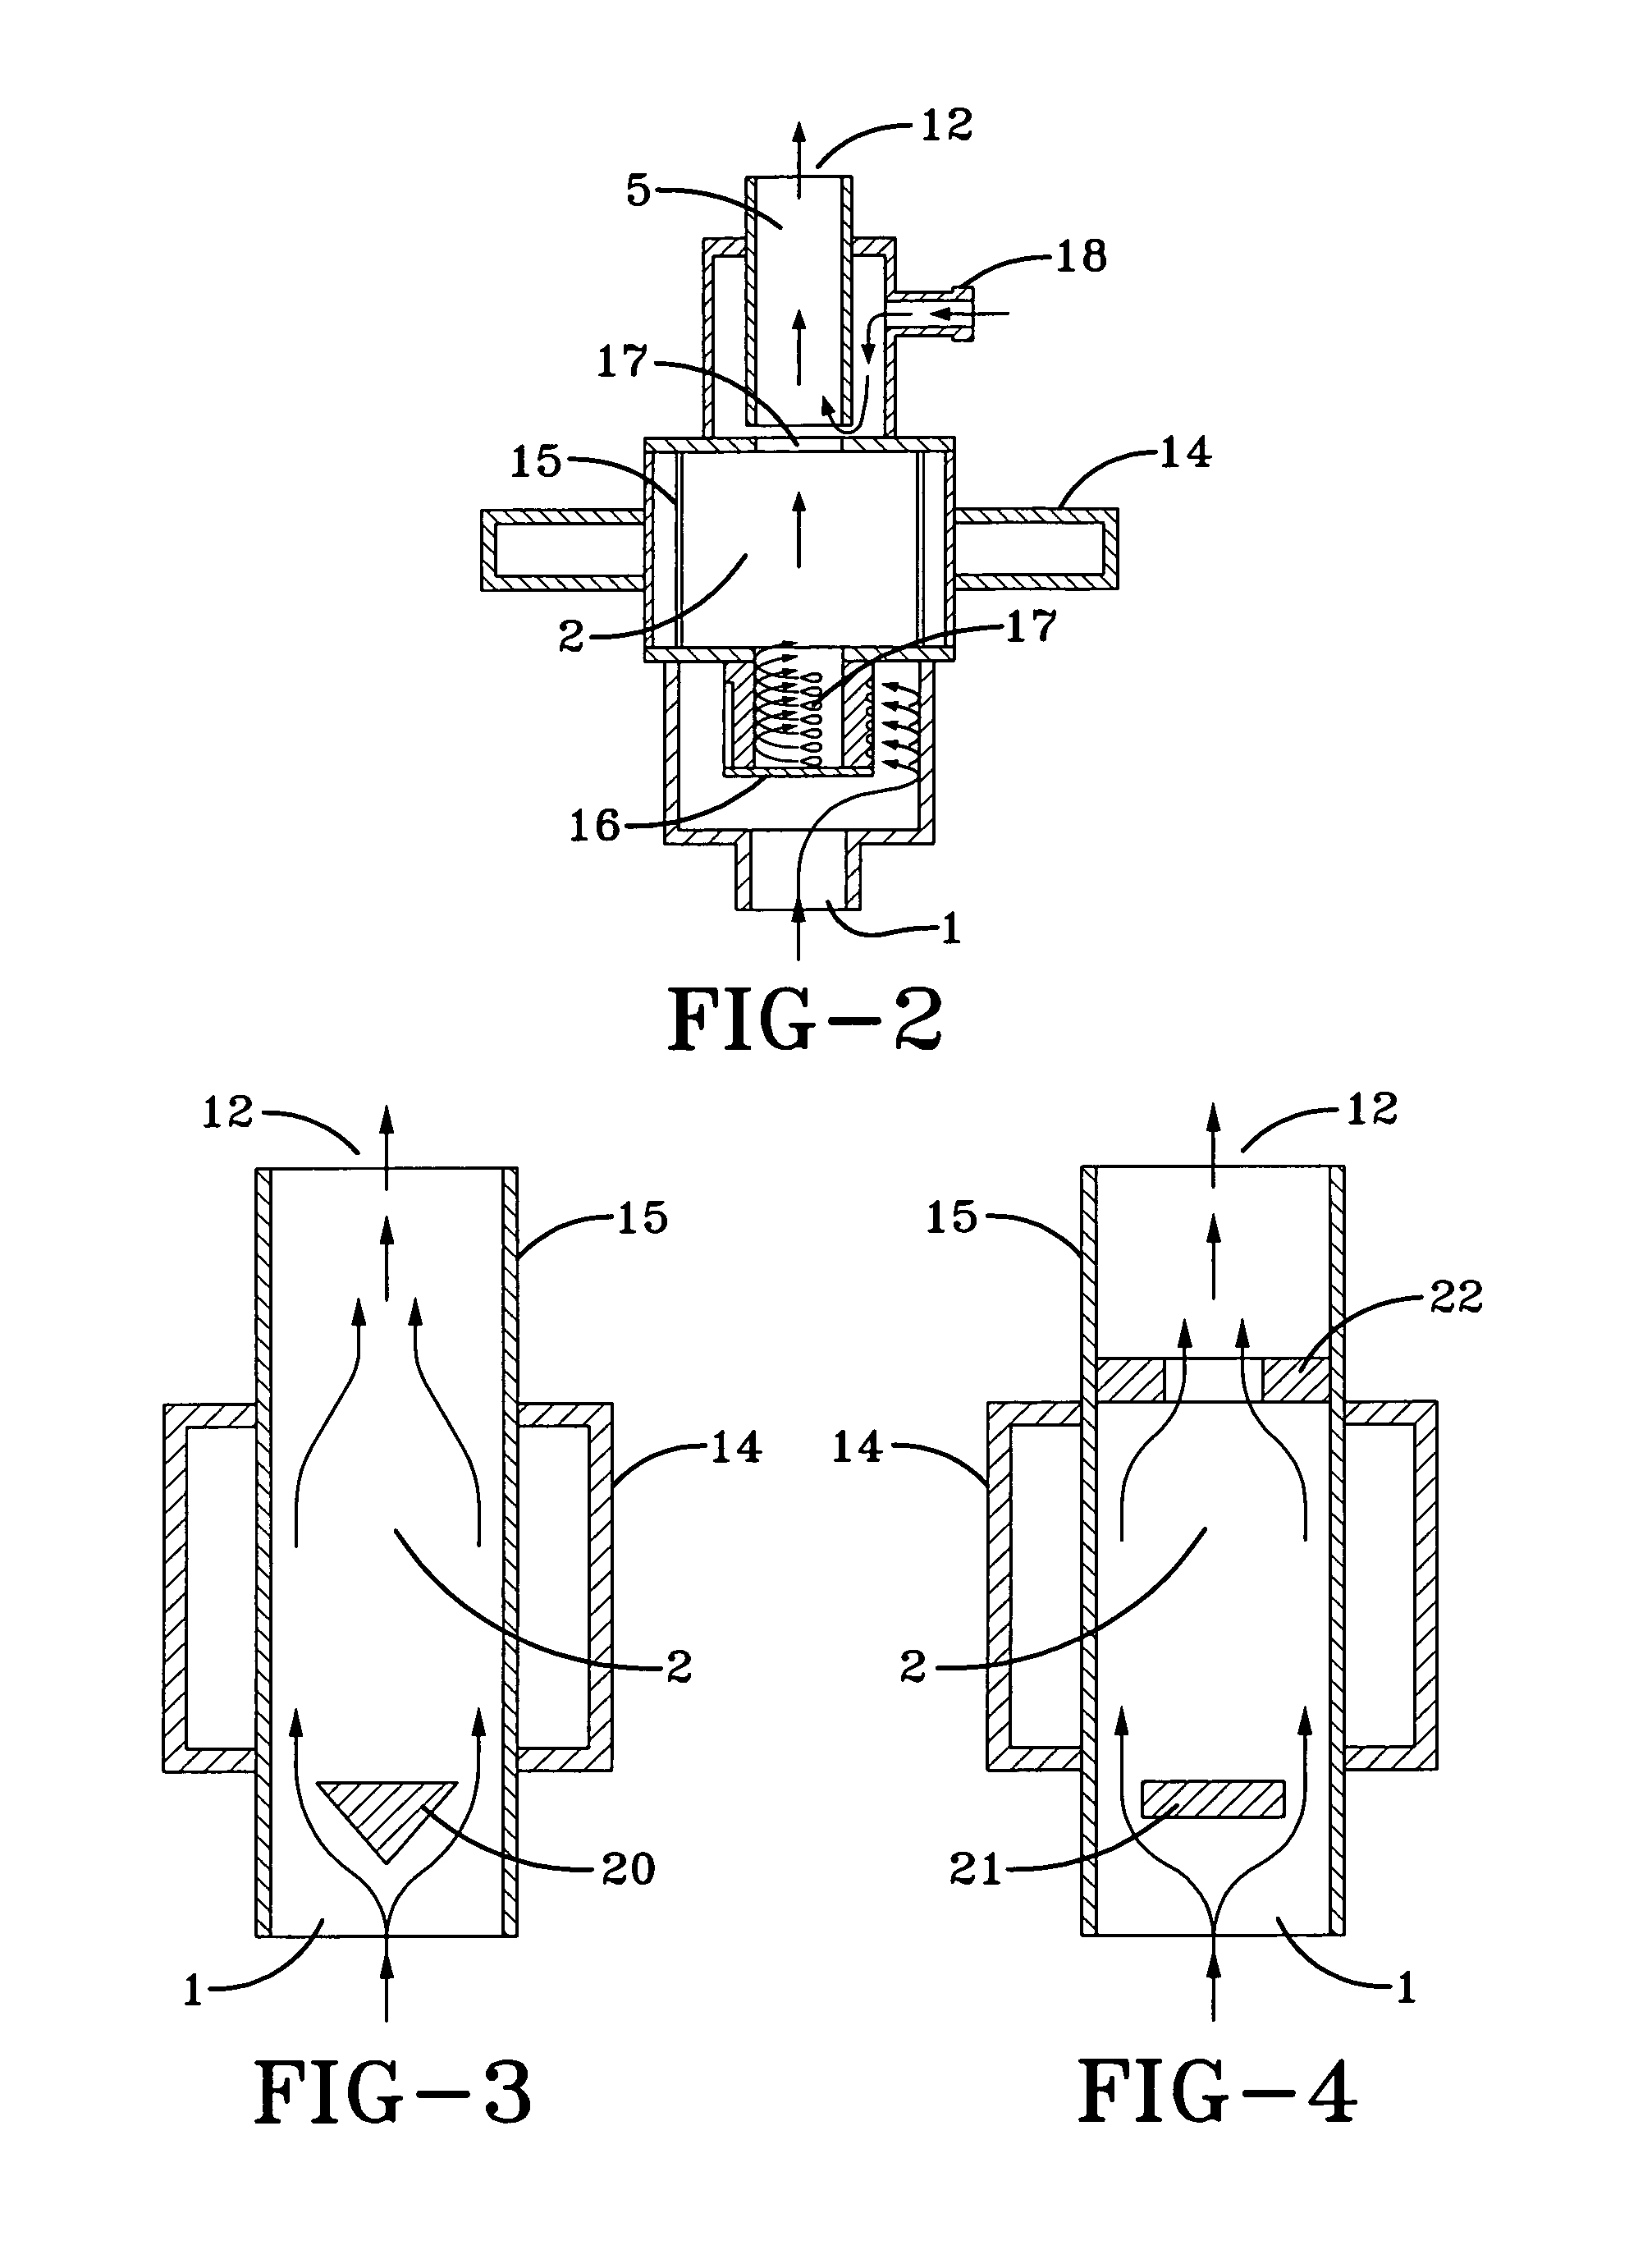 Plasma reactor for carrying out gas reactions and method for the plasma-supported reaction of gases